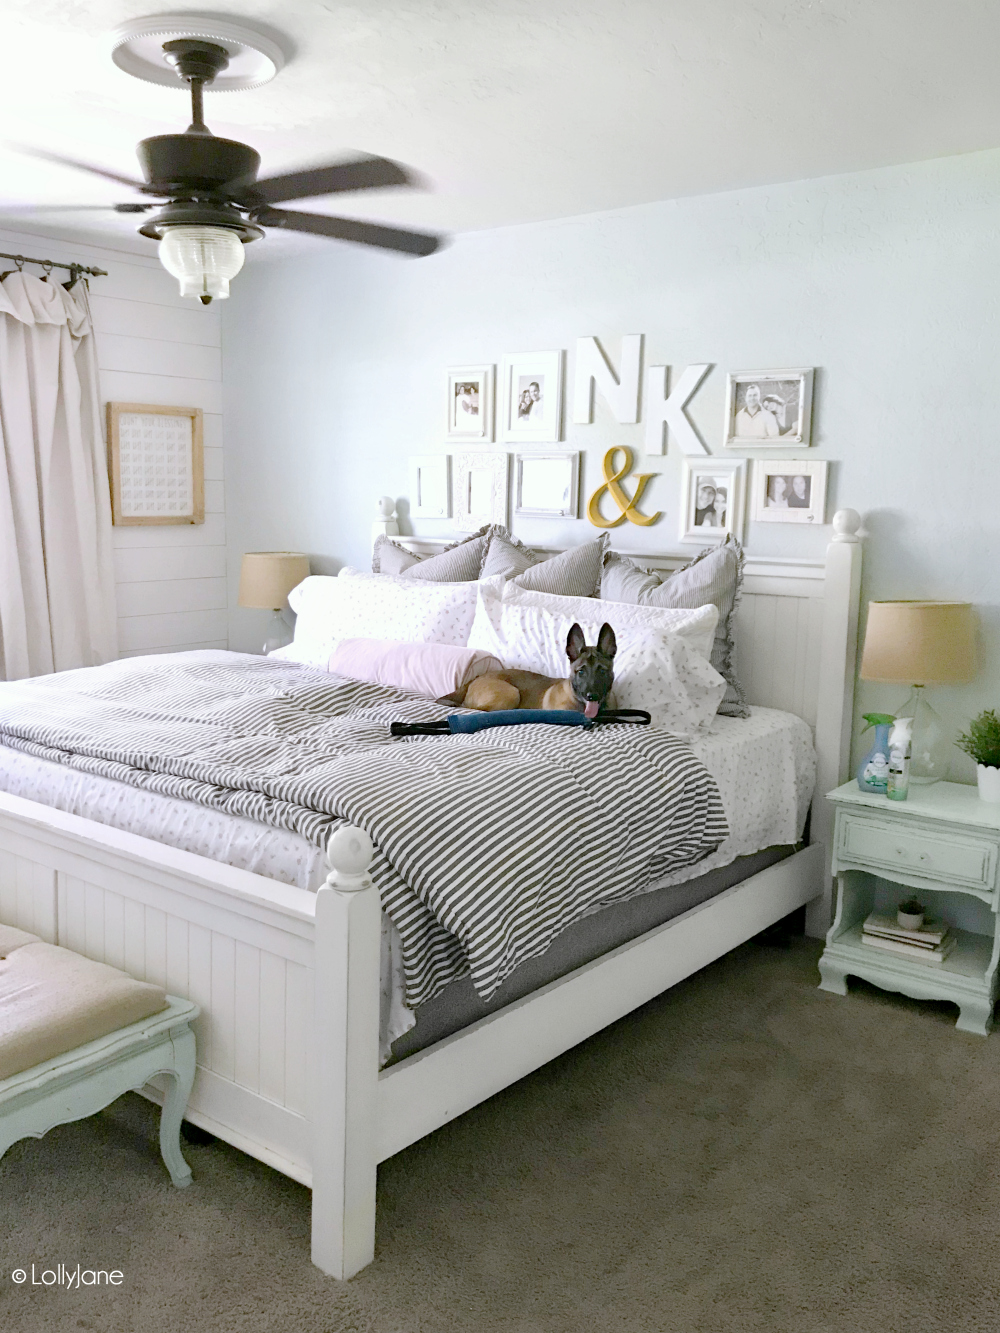 Don't forget your pet when Spring Cleaning! Check out these EASY Spring Cleaning Pet Tips t make sure your pets spaces are as fresh as your home! #pets #springcleaning #ad #dontsweatyourpet